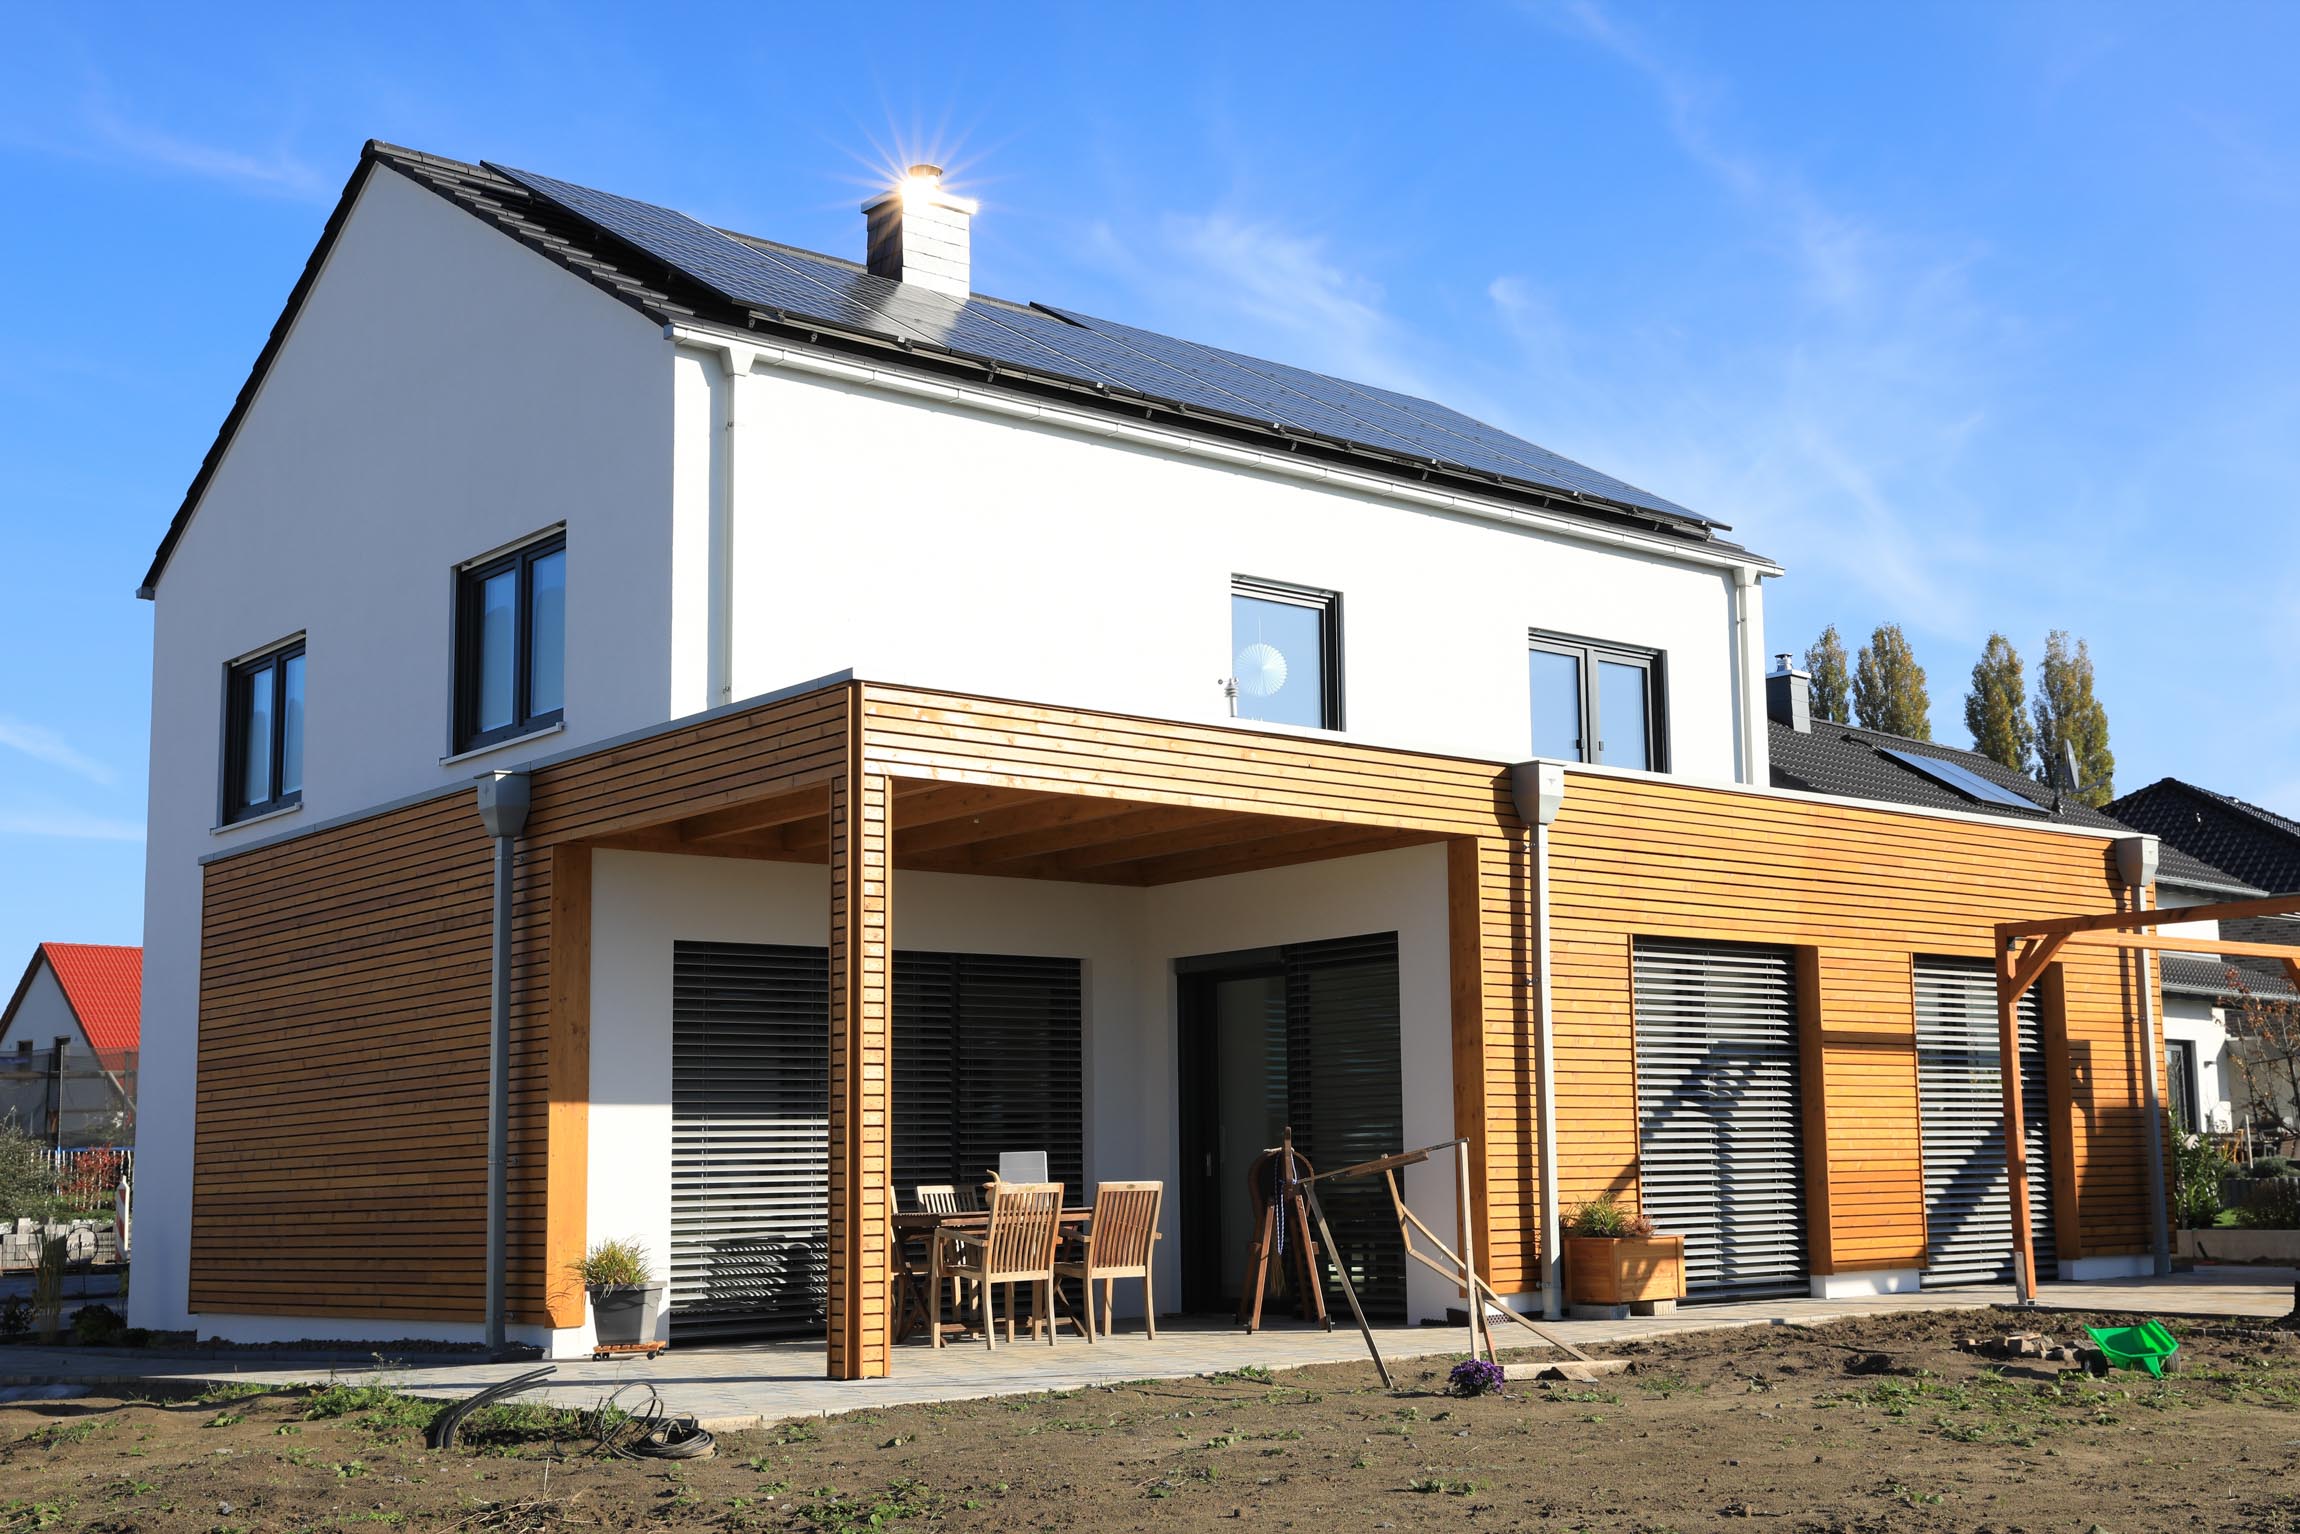 New build single family house in MÃ¼nsterland, Westphalia, Germany, 10-31-2021